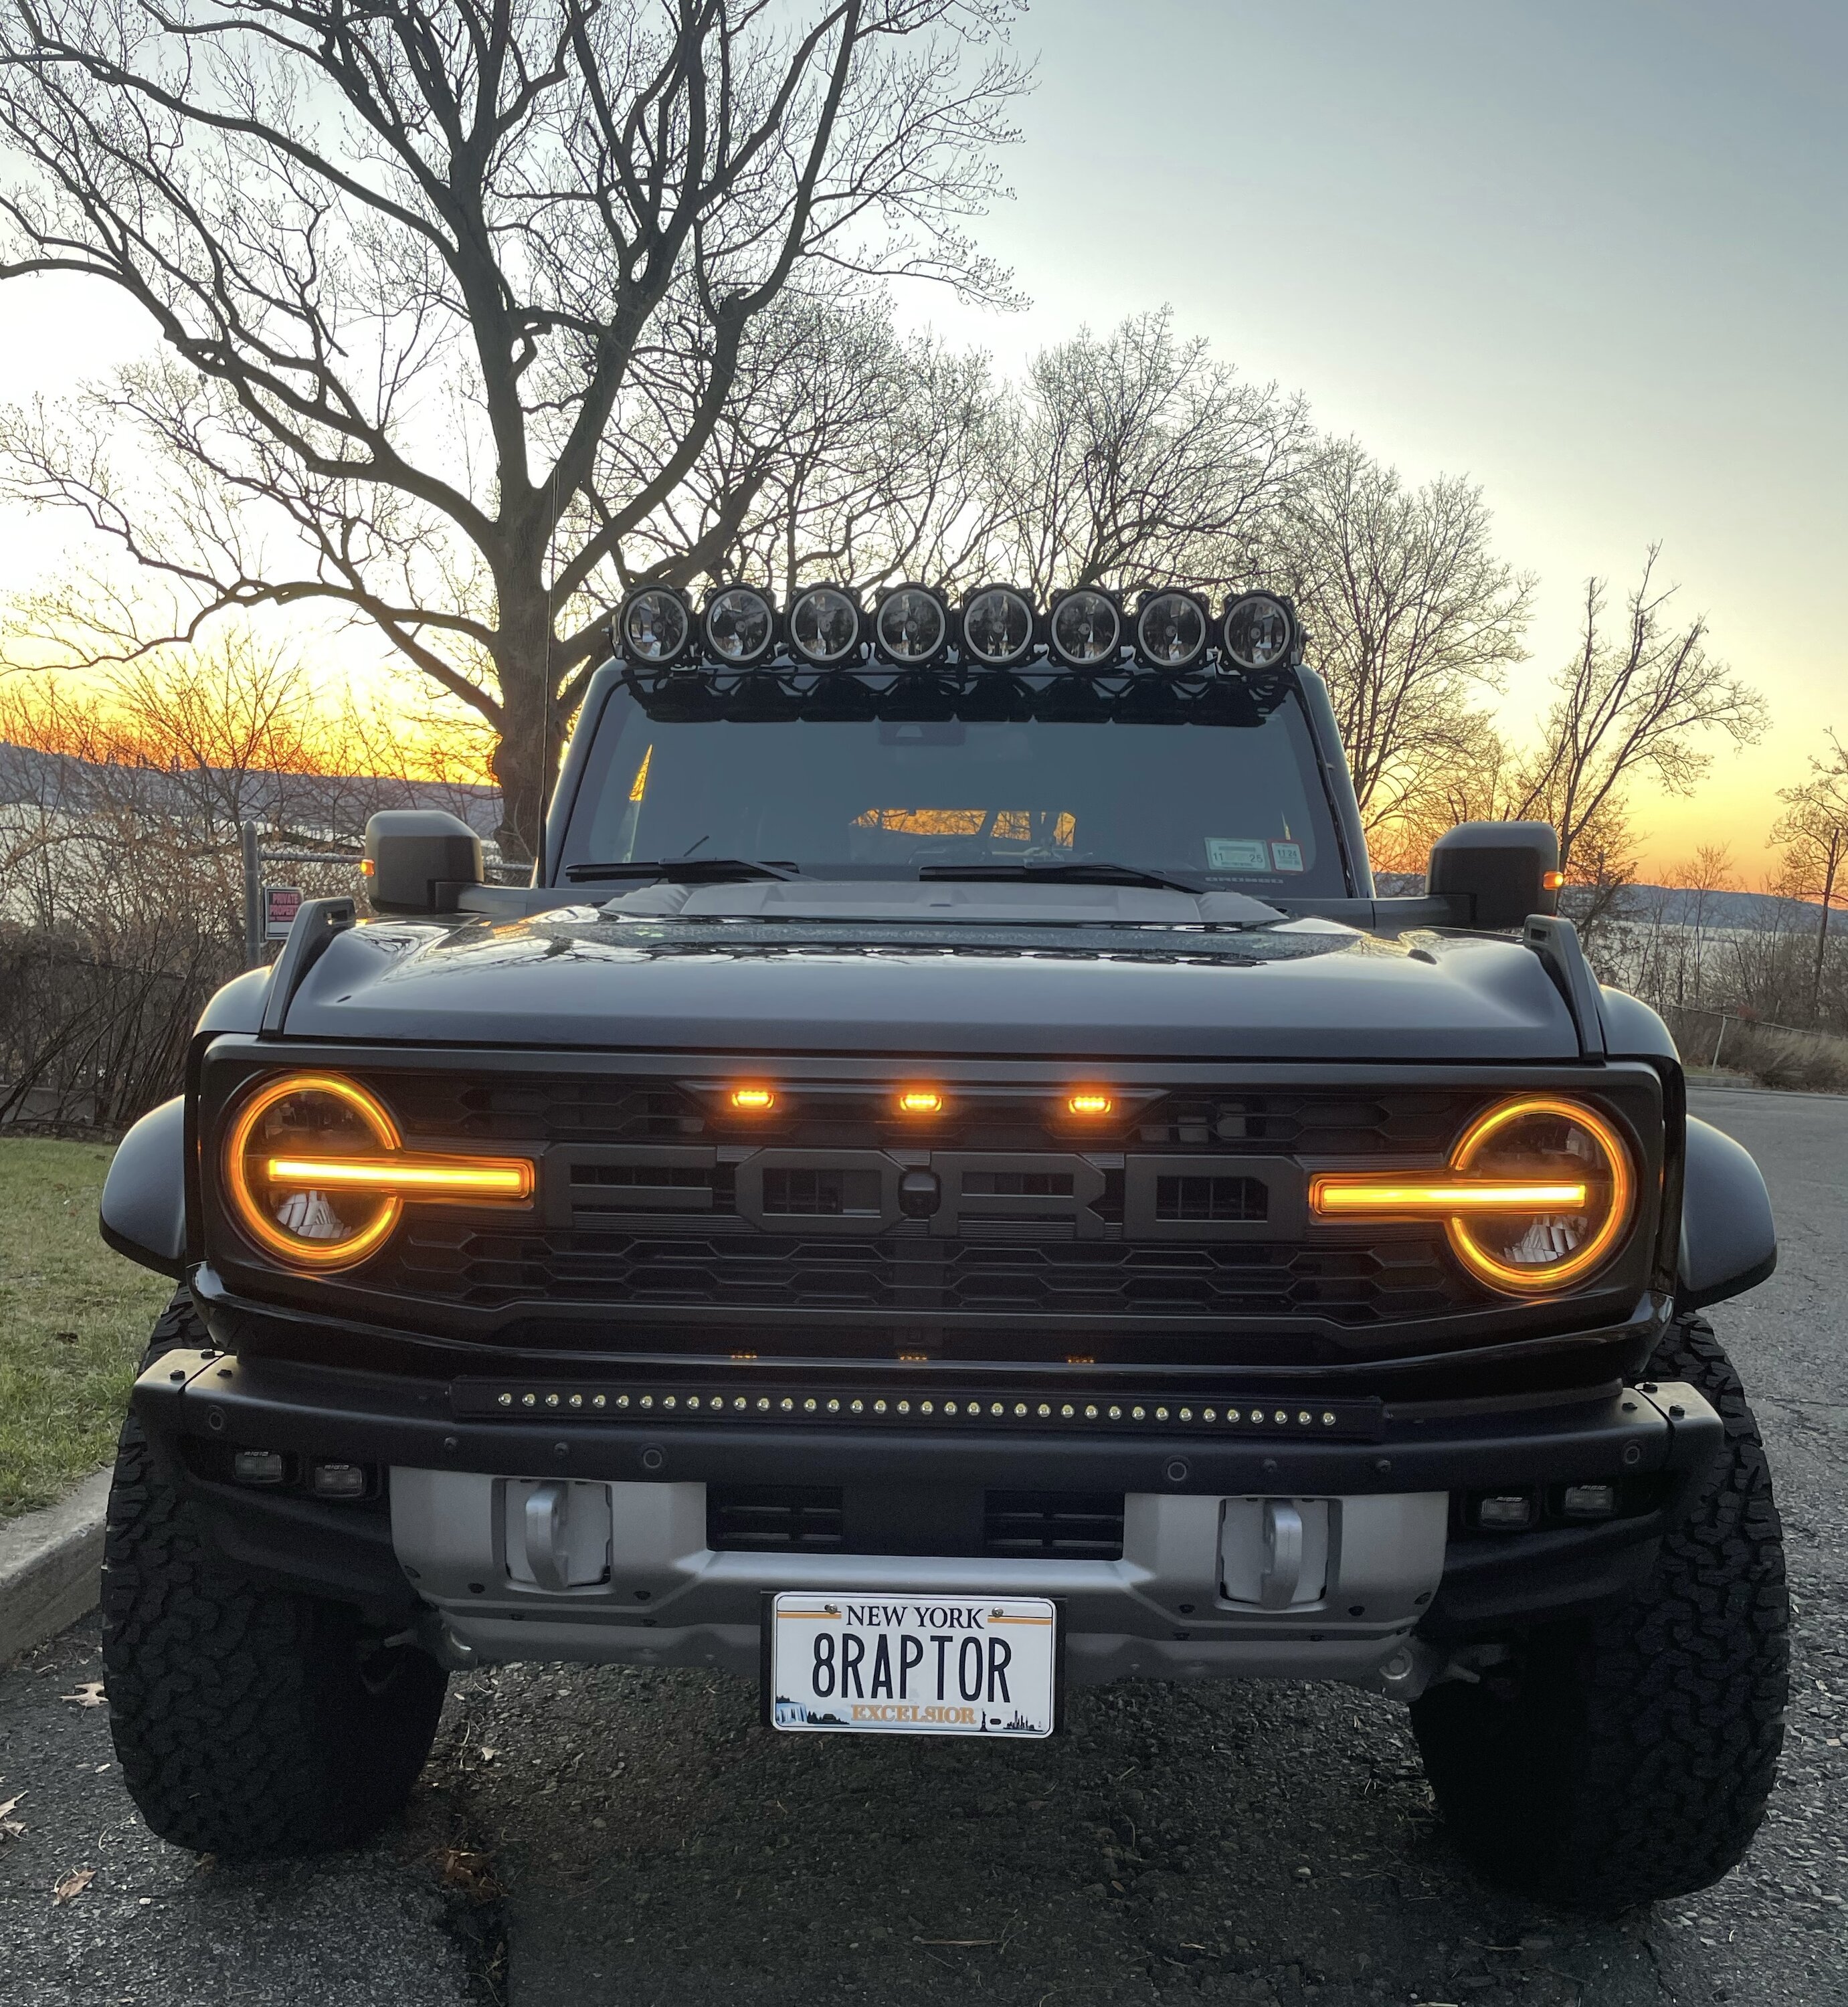 Ford Bronco PRICE DROP - Finally a Front License Plate bracket solution - order yours today image0